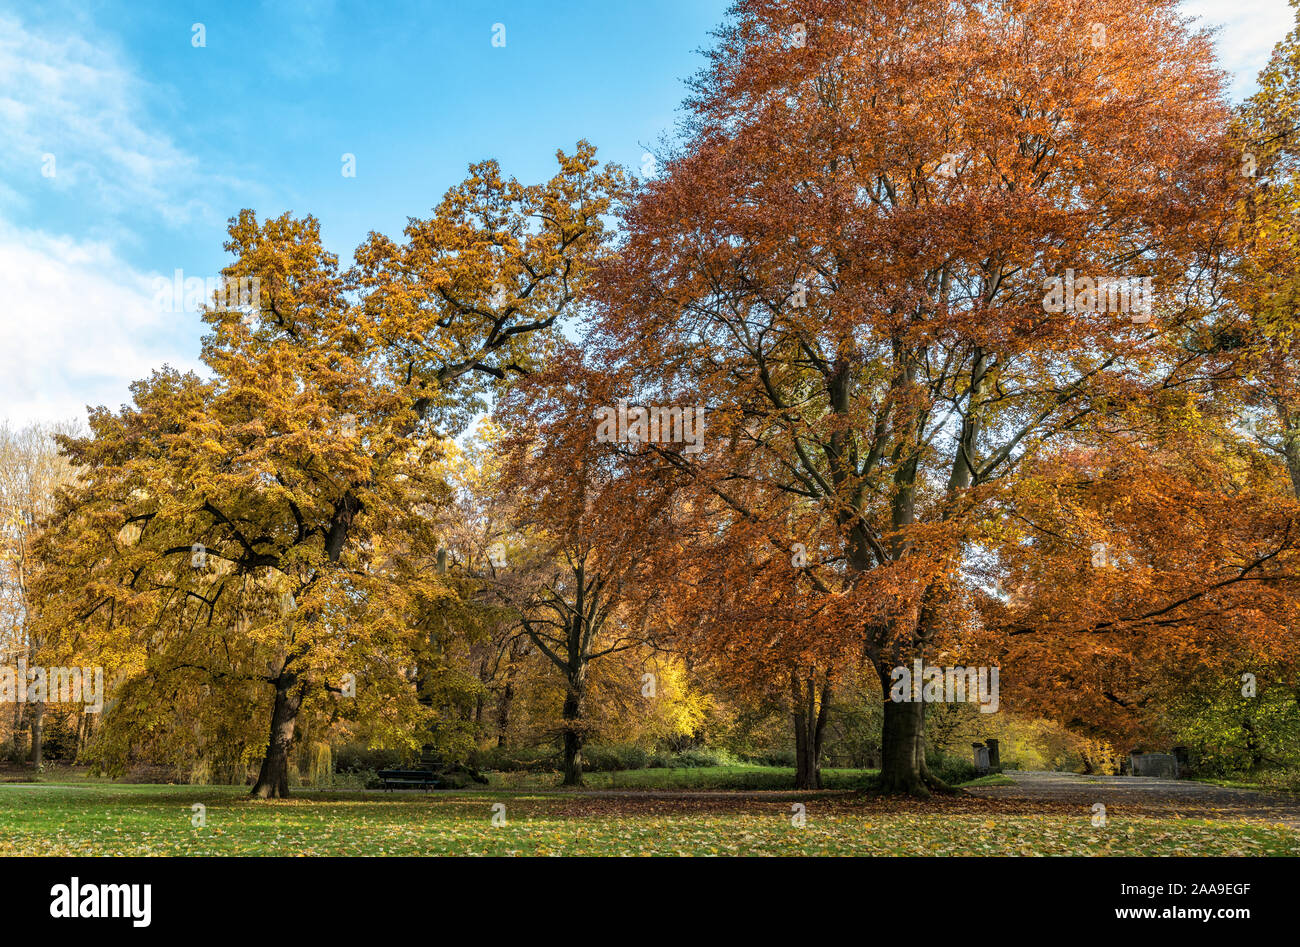 together in the autumn of life Stock Photo